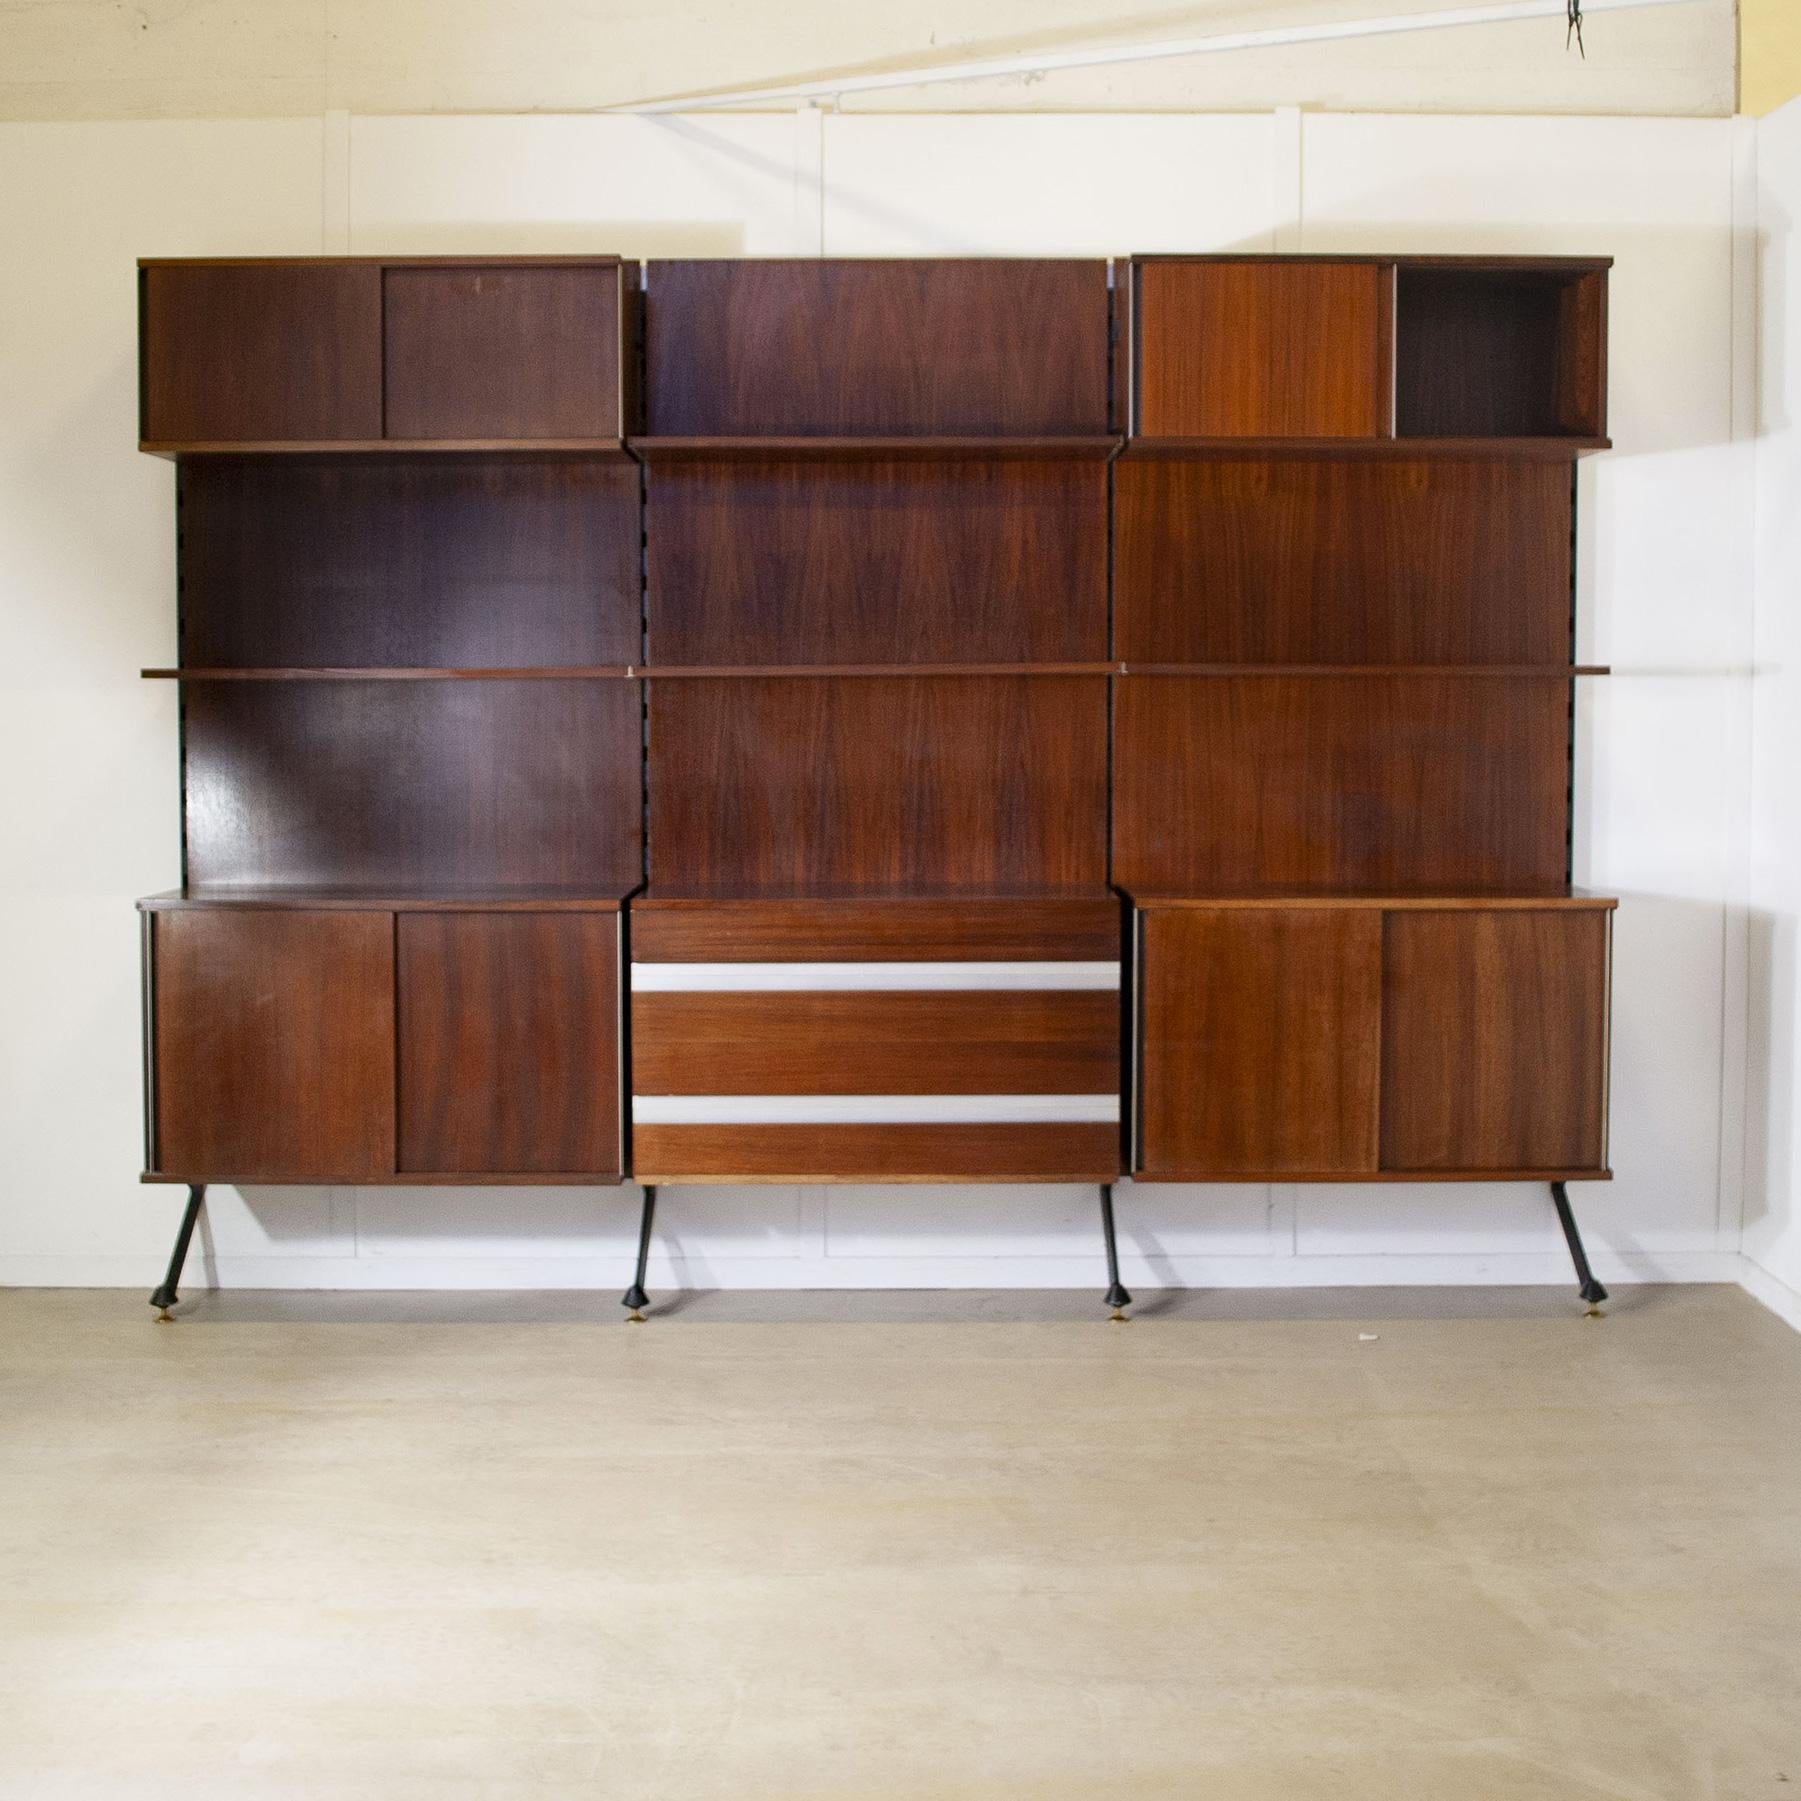 Mim bookcase designed by Ico Parisi , Rome ca. 1960, made of rosewood, restored and consisting of three modules.

MIM, Mobili Italiani Moderni, is an Italian furniture company that made a strong contribution to the spread of Italian design and